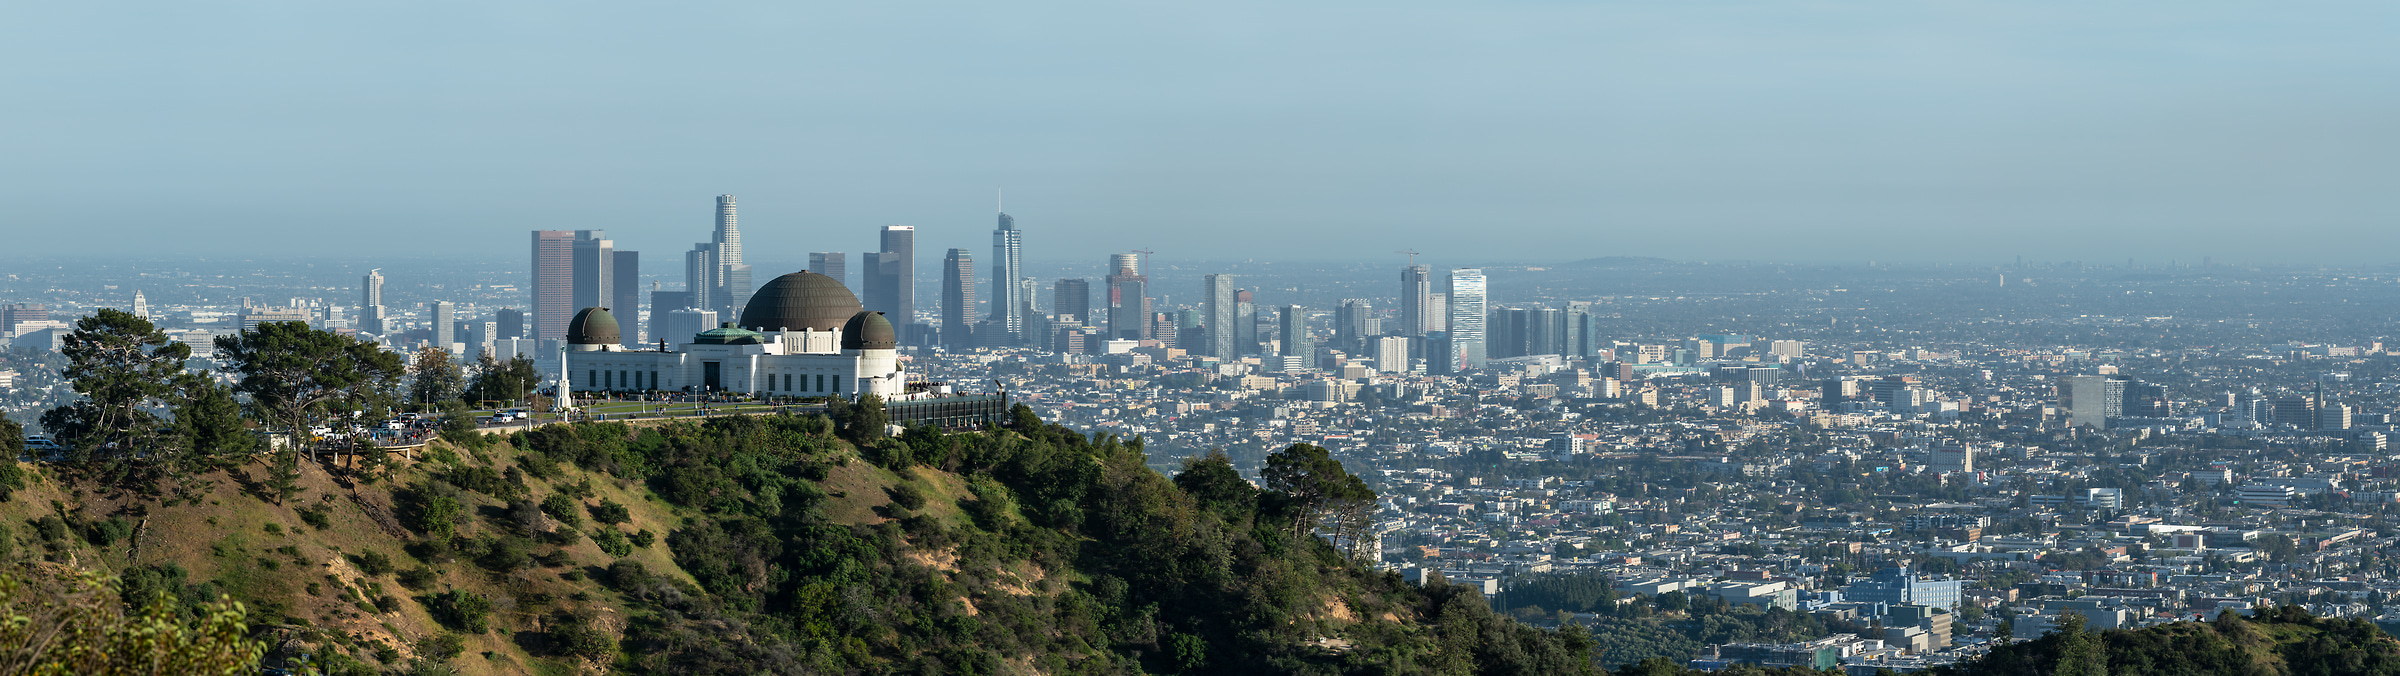 427 megapixels! A very high resolution, large-format VAST photo print of Griffith Observatory in front of the Los Angeles skyline; panorama photograph created by Greg Probst in Griffith Park, Los Angeles